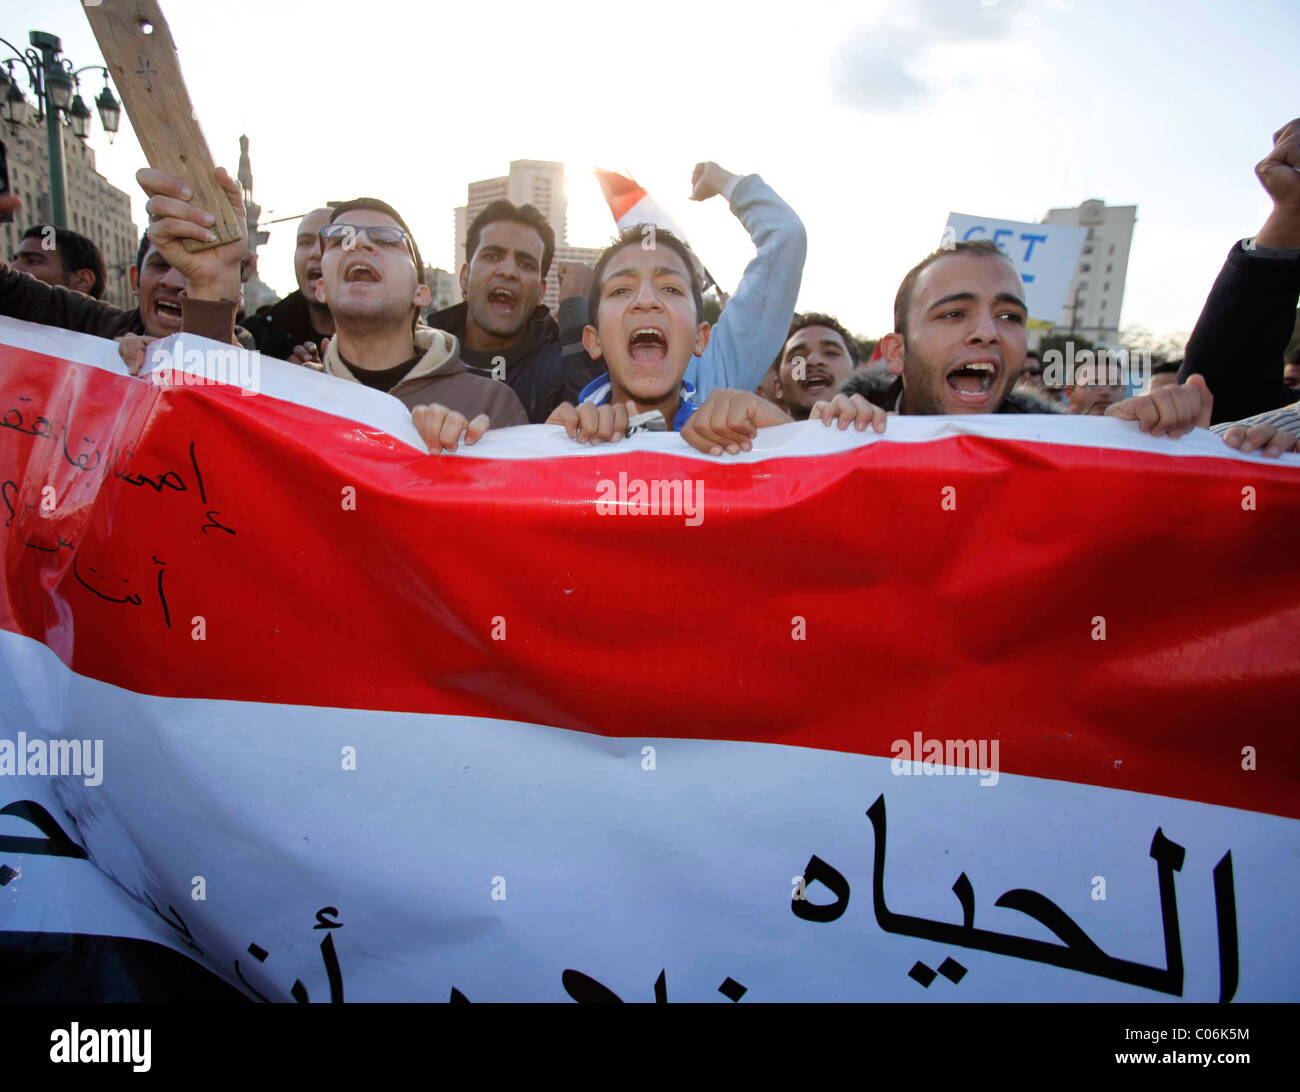 Civil unrest in Cairo, Egypt, 31st January 2011. Stock Photo